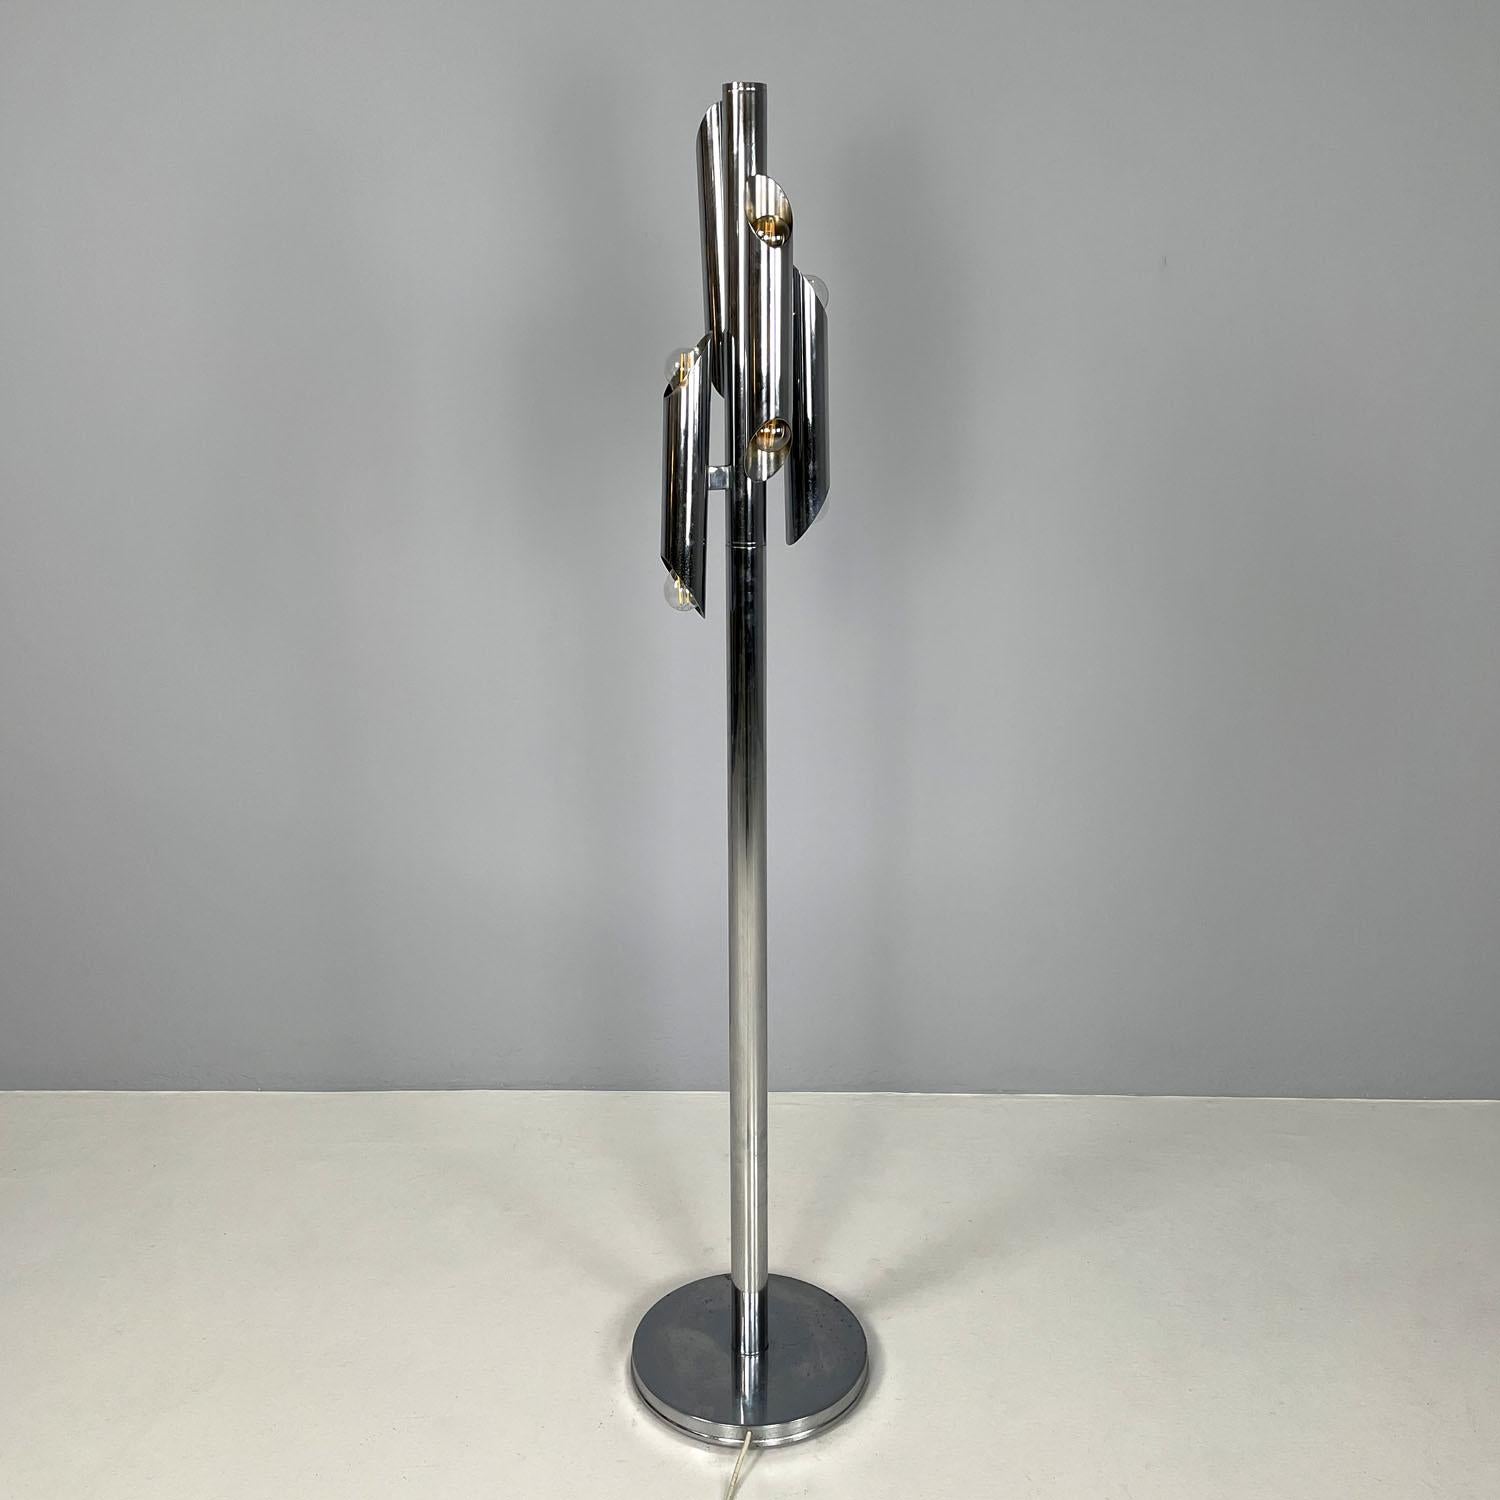 Italian modern Space Age floor lamp in chromed metal, 1970s
Space Age style round base floor lamp. The structure is entirely made of chromed metal. In the upper part there are four cylindrical diffusers with the two ends cut diagonally, at each end